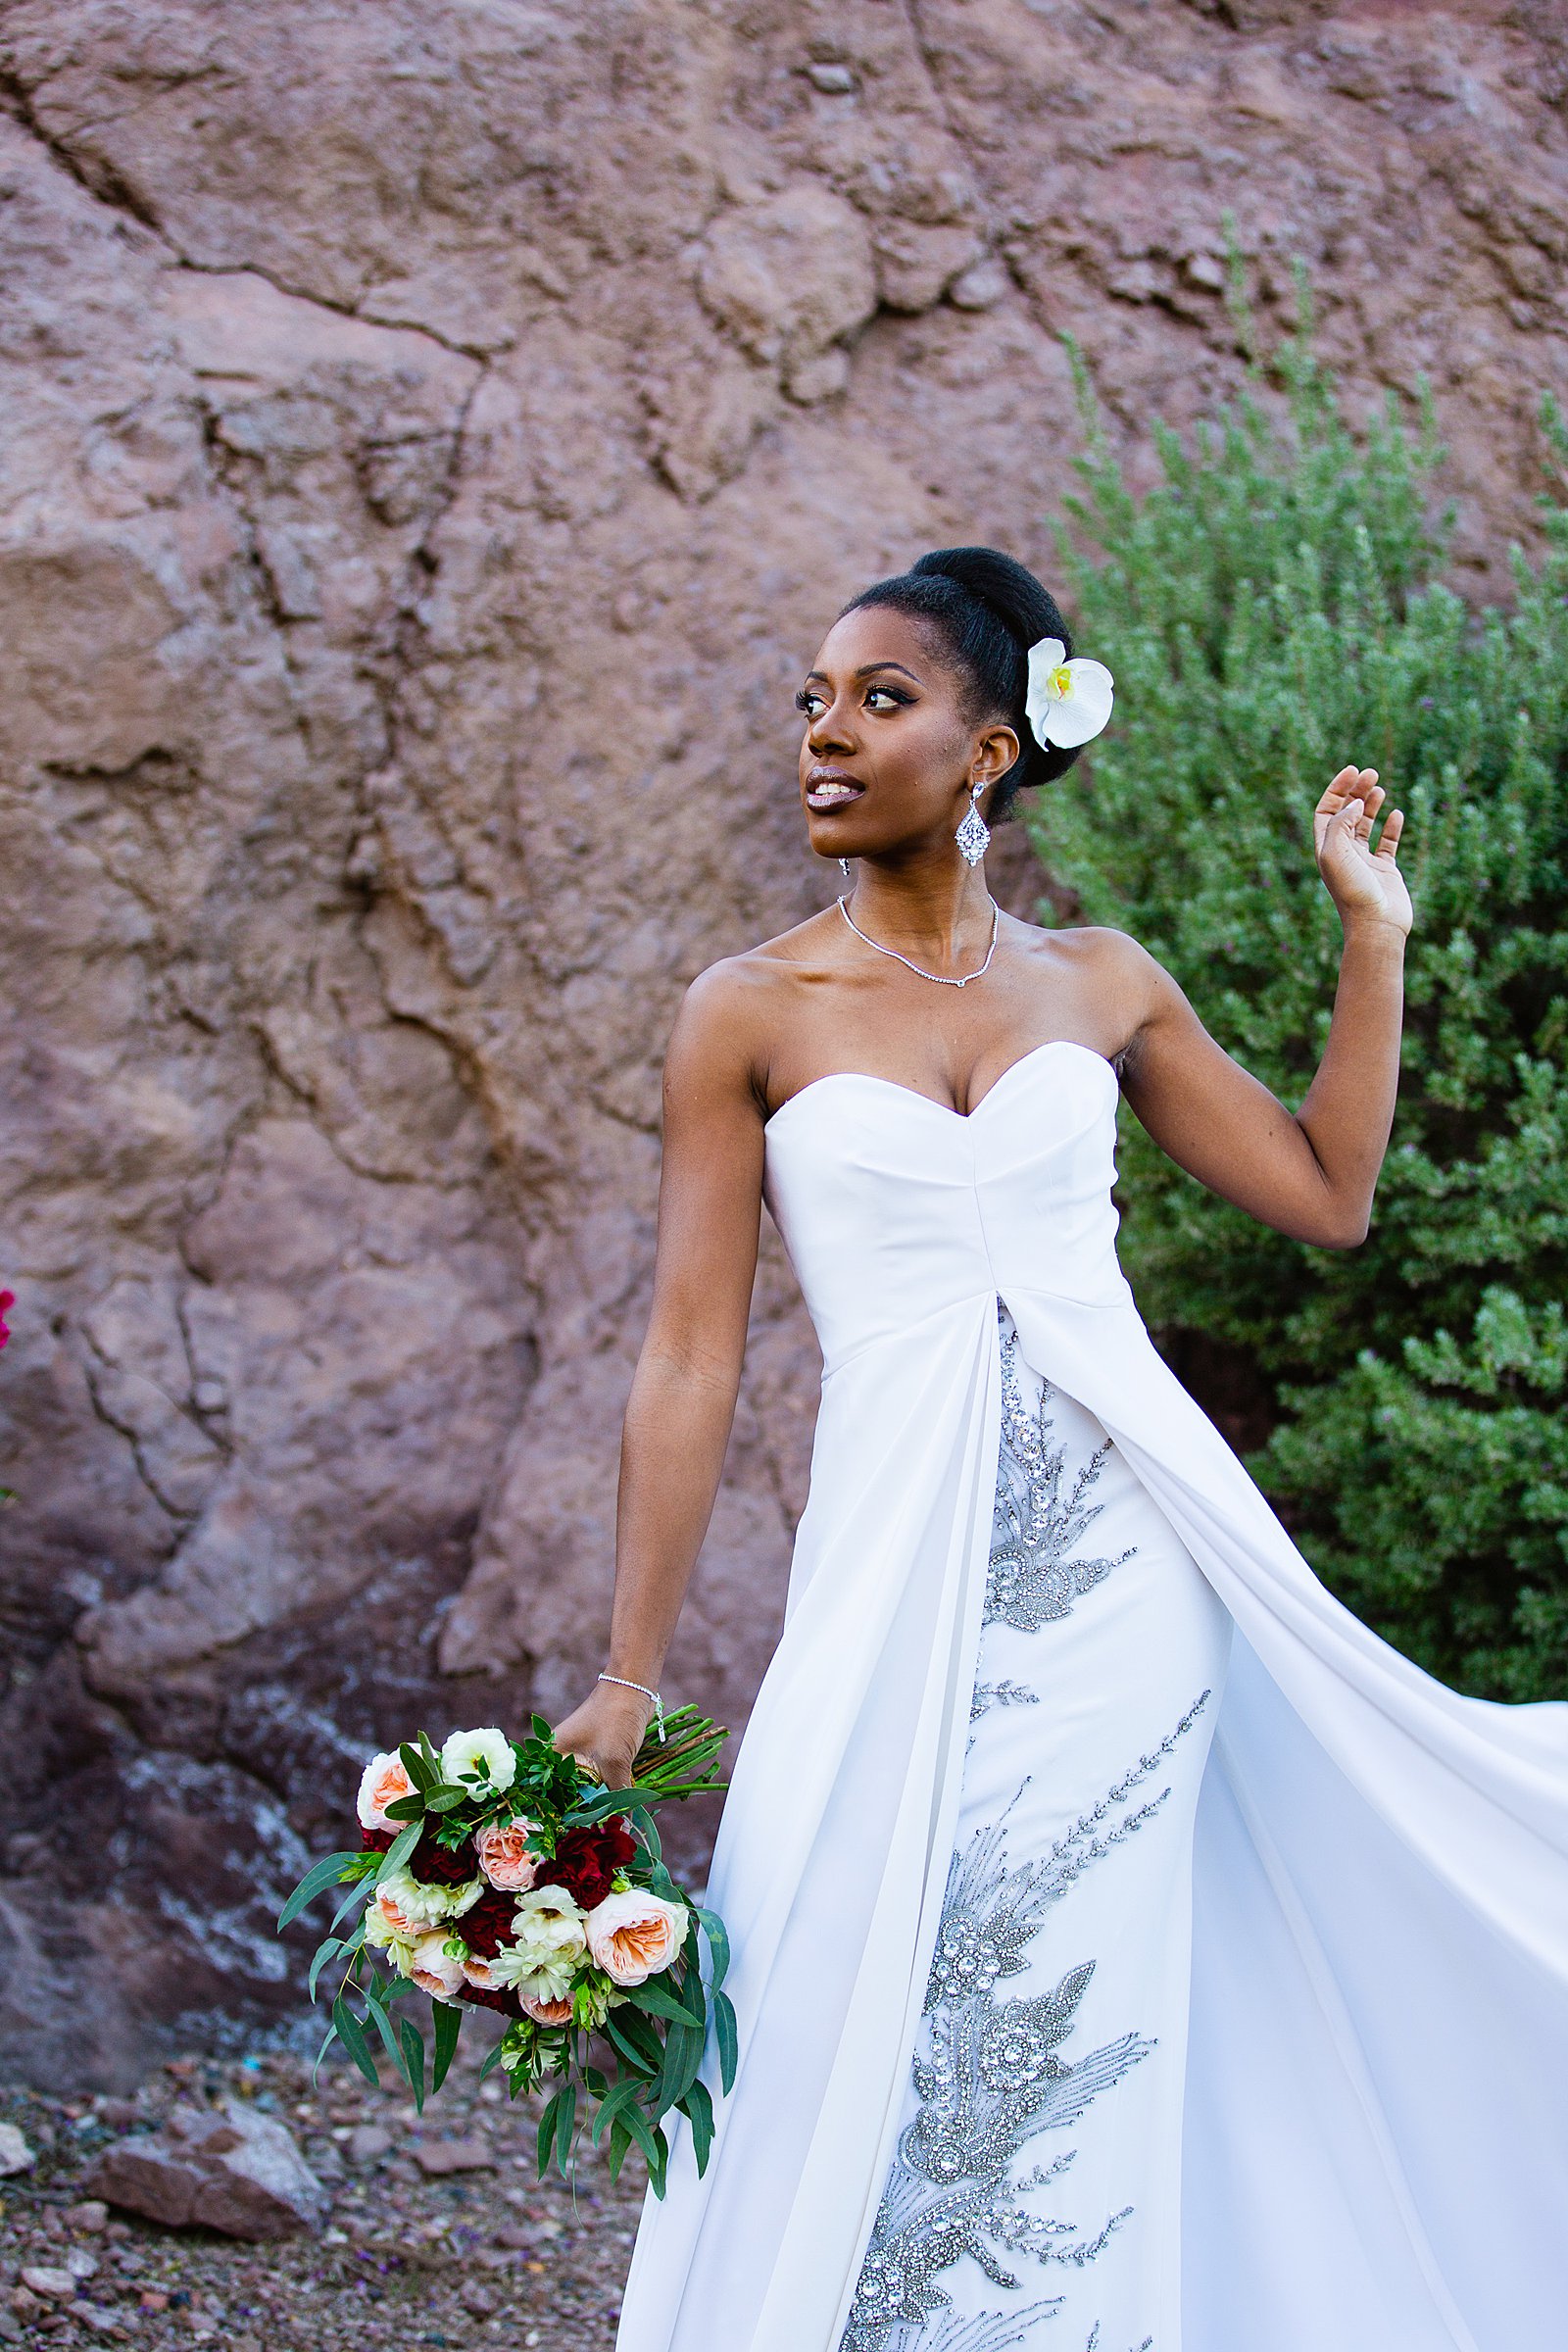 Bride's beaded wedding dress for her multicultural wedding by PMA Photography.